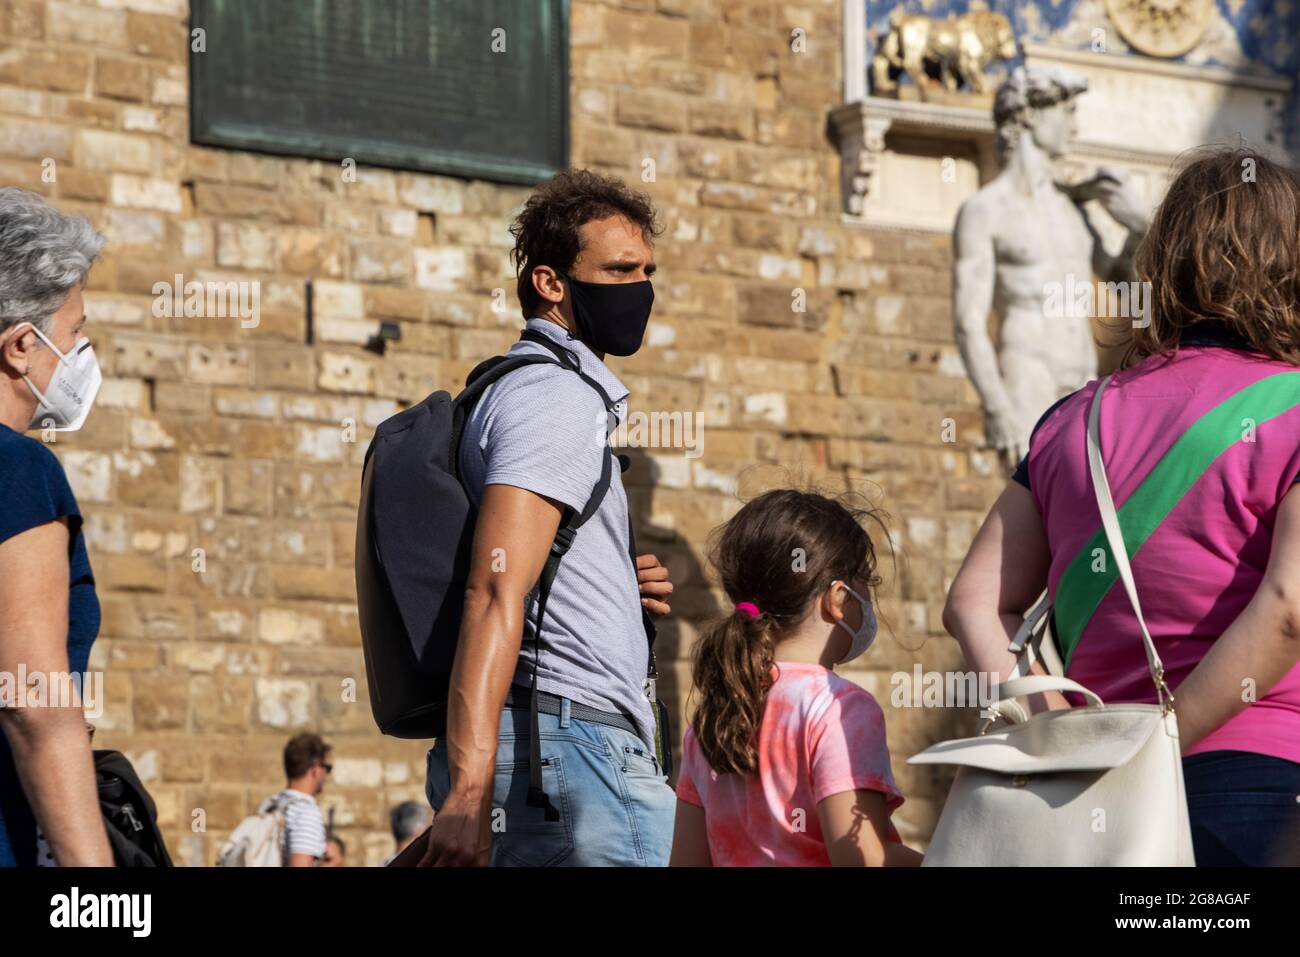 People, tourists walking in the square next to David sculpture wearing face masks during covid 19 quarantine in Italy. Slow reopening after pangemic. Stock Photo